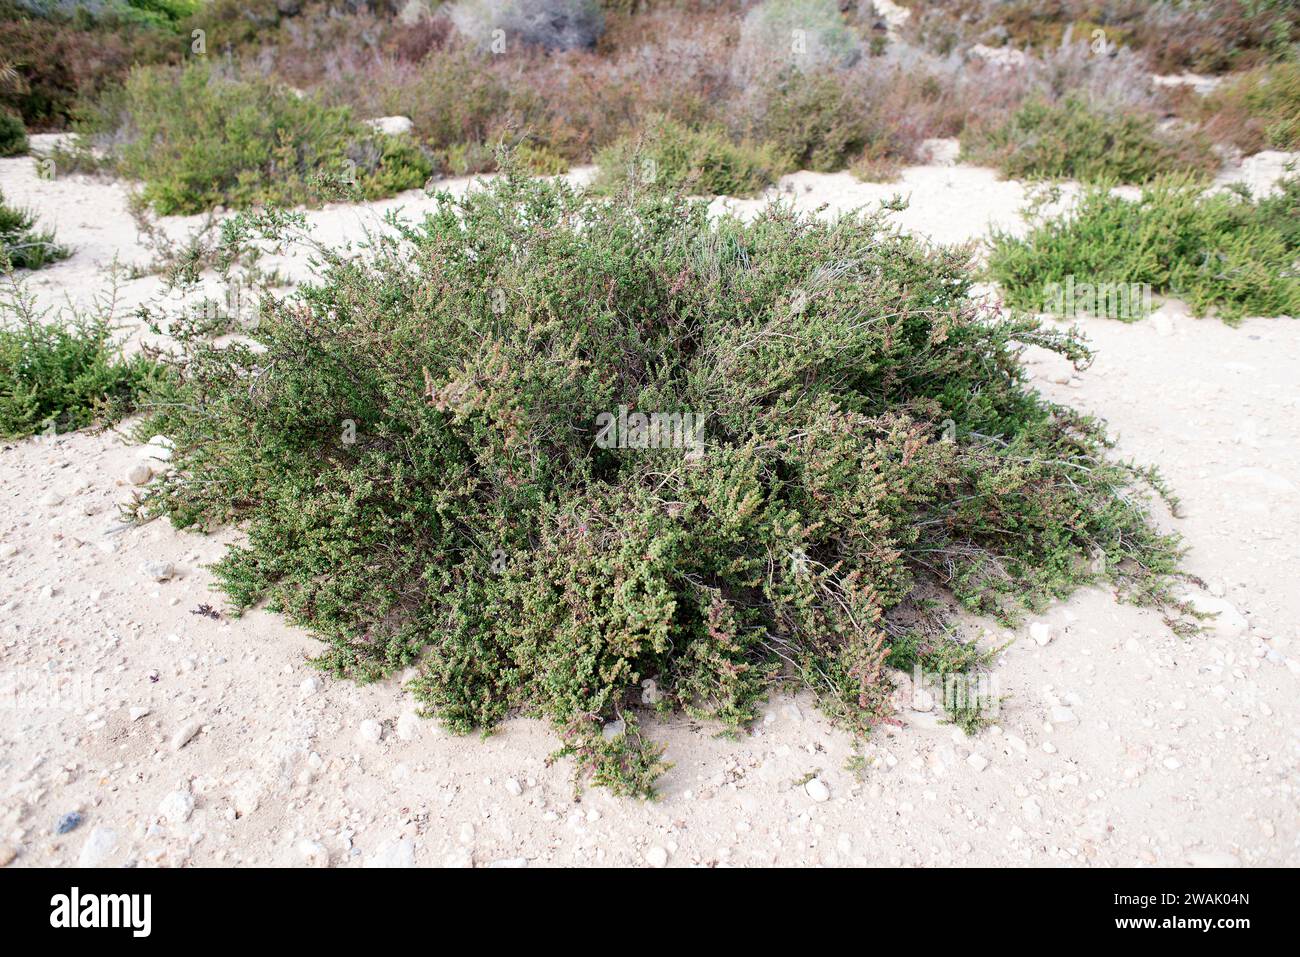 Mediterranean saltwort (Salsola vermiculata) is a shrub native to arids regions, southwestern Europe, north Africa and western Asia. This photo was ta Stock Photo